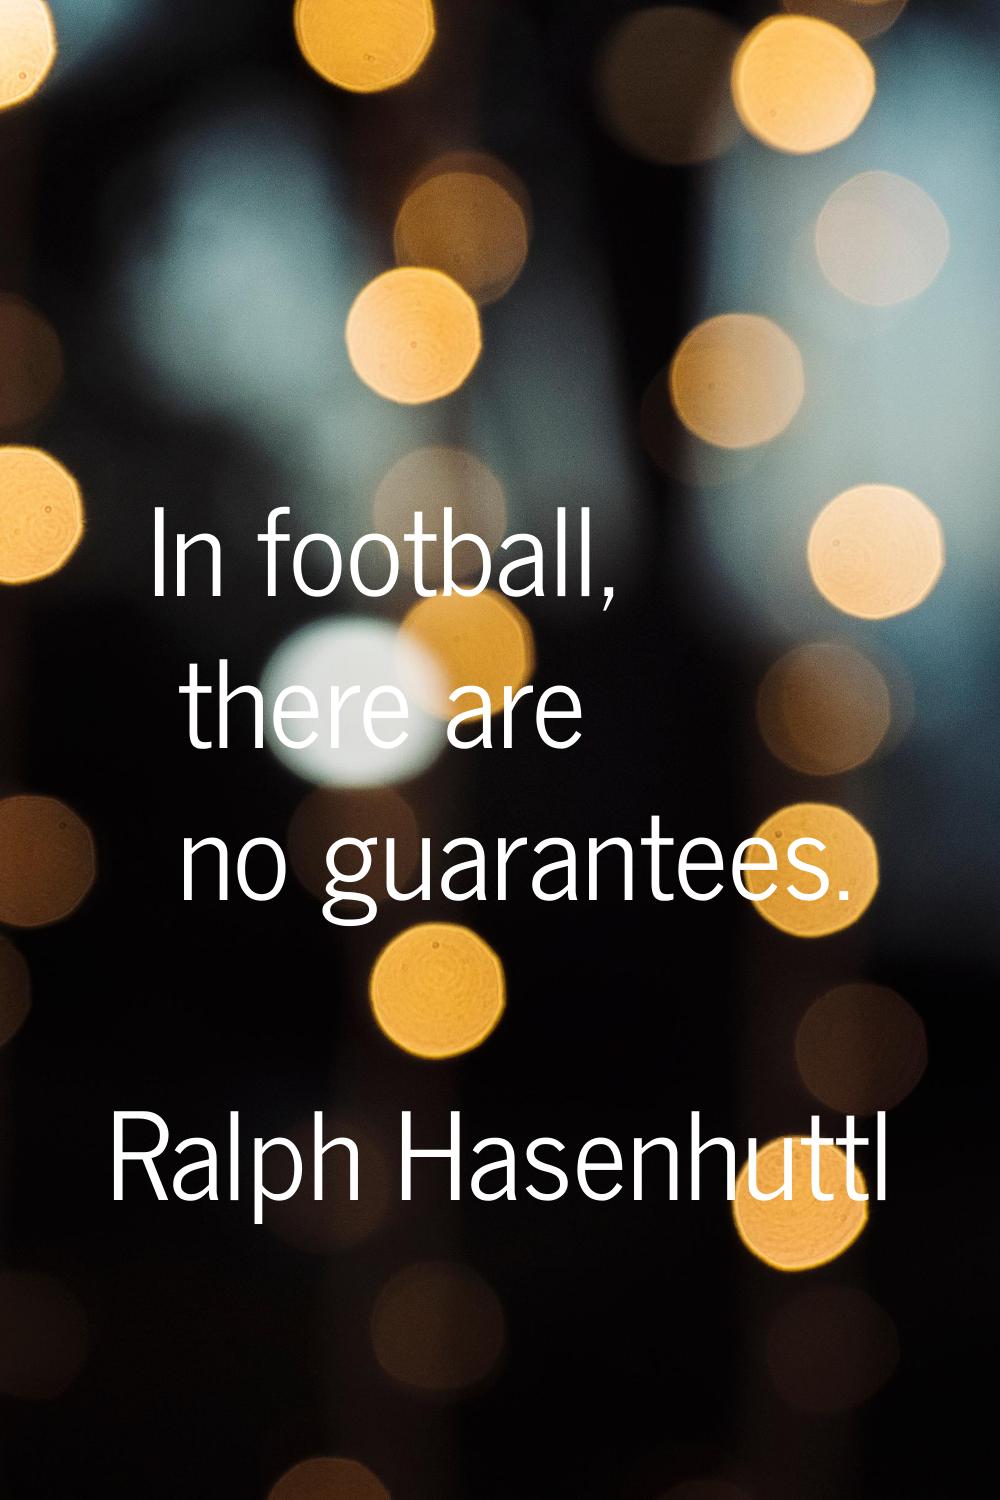 In football, there are no guarantees.